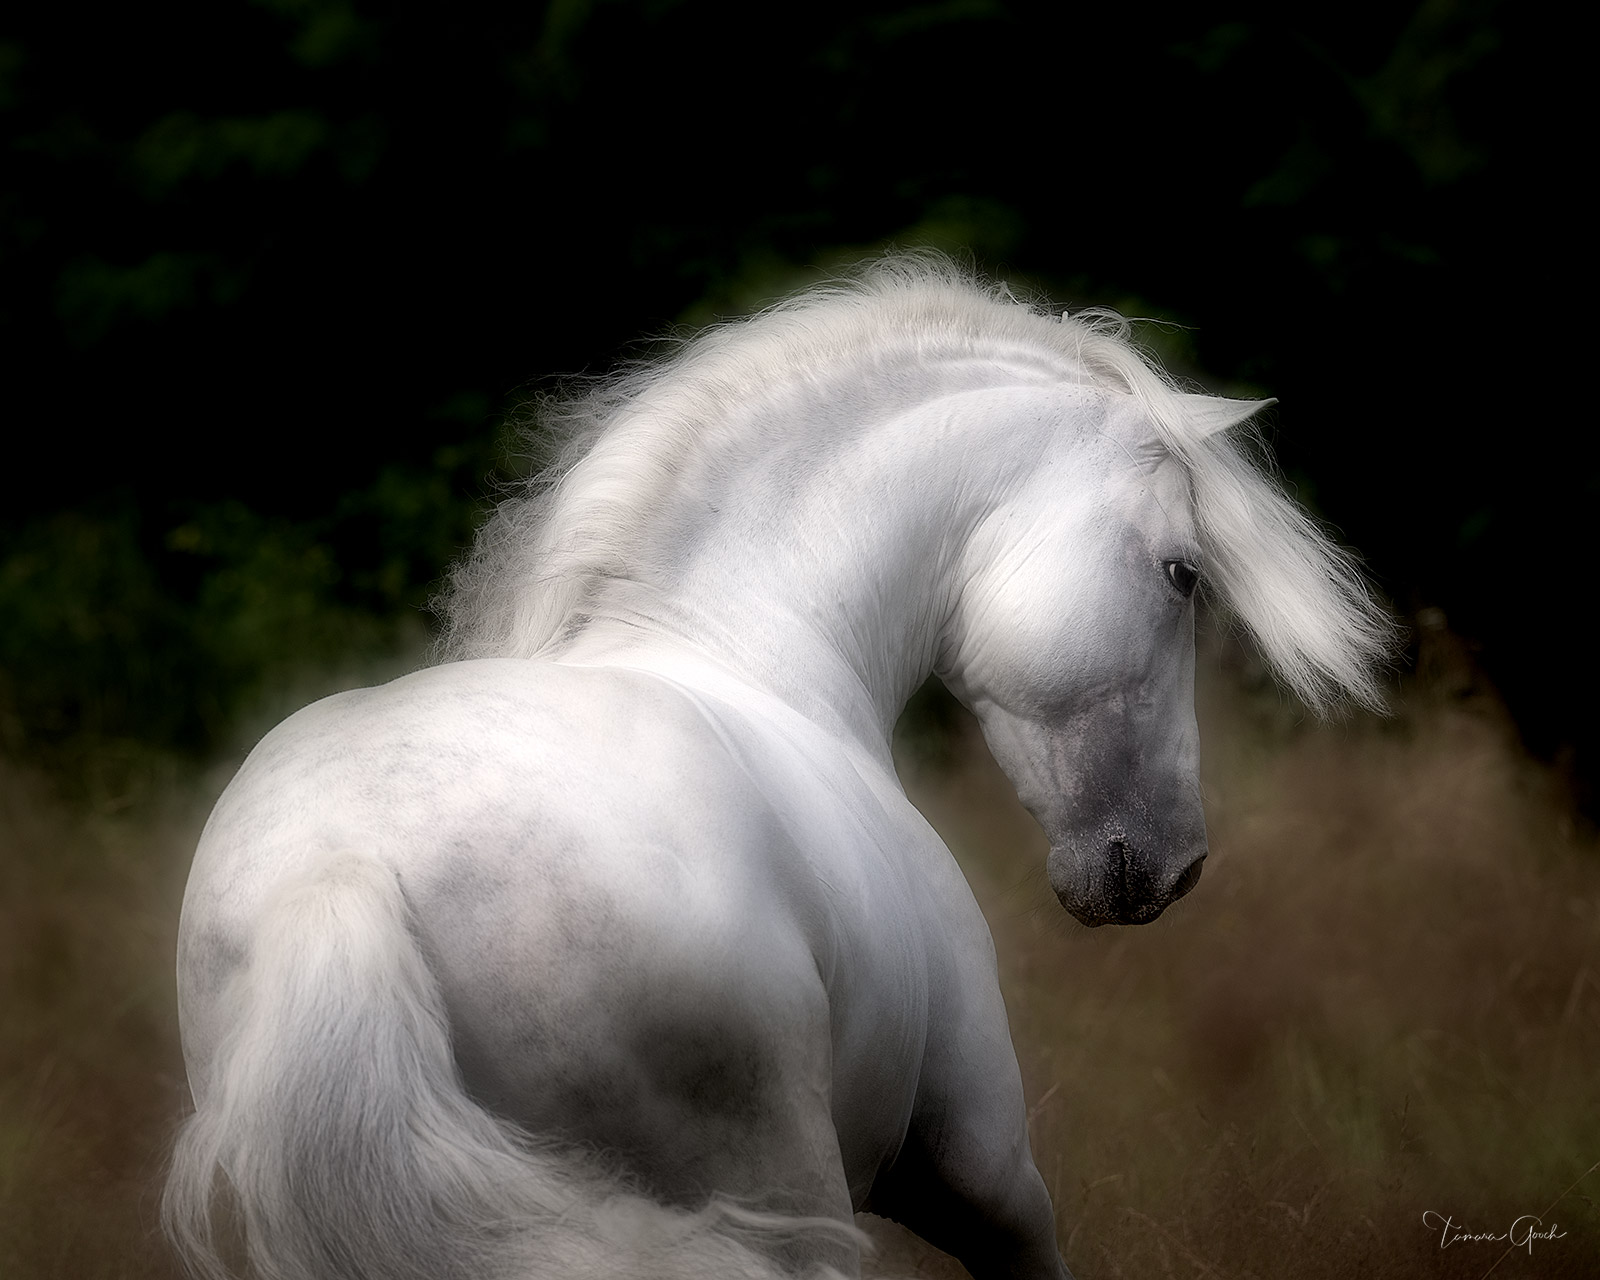 The beauty of the Pure Spanish Horse or Andalusian is captured in this exquisite photograph by Tamara Gooch available as gallery quality prints.